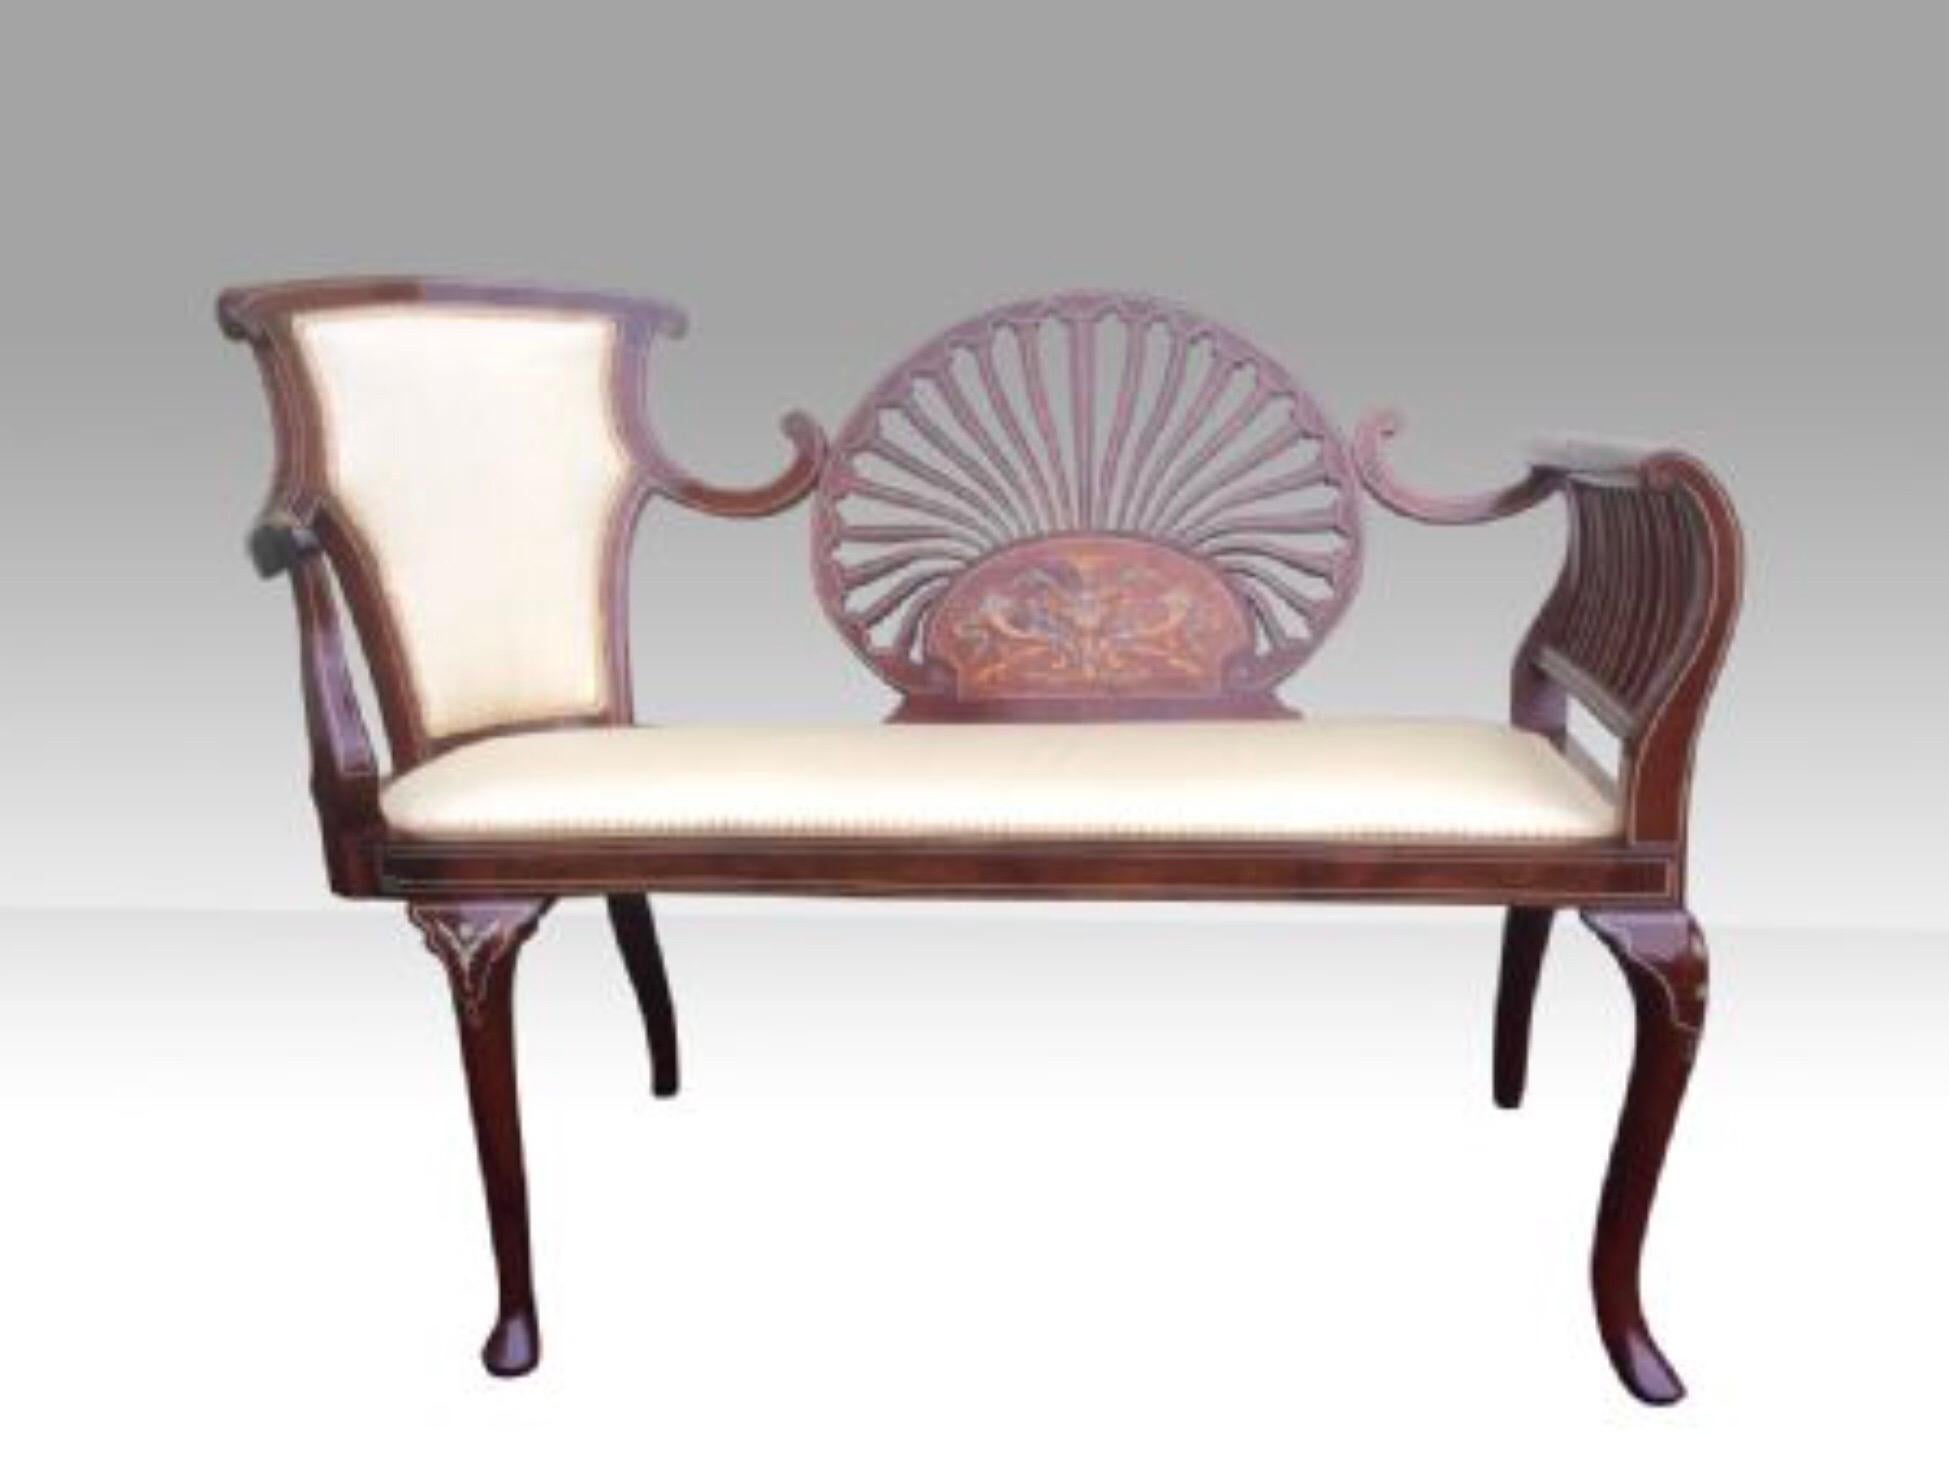 Fantastic quality Mahogany Edwardian Period Settee of small proportions with fine Floral and line inlay , central pierced Fan back ,swept arms and Cabriole legs re-upholstered in light Cream Water mark / Moira .fabric.
English
In perfect beautiful